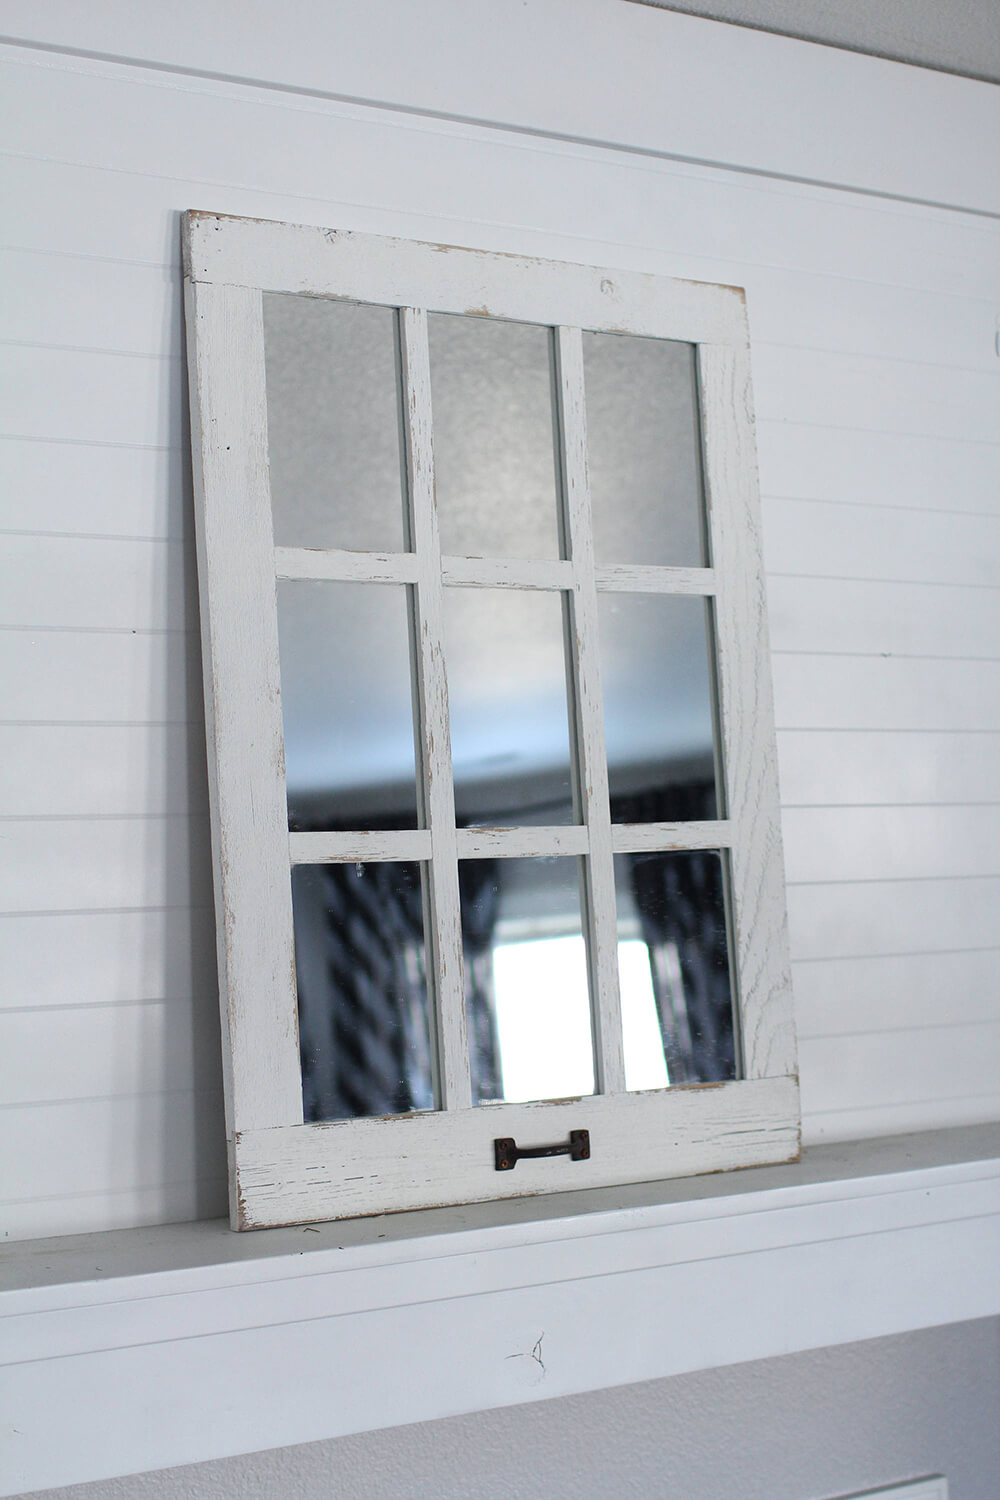 A New Purpose for Reclaimed Windows